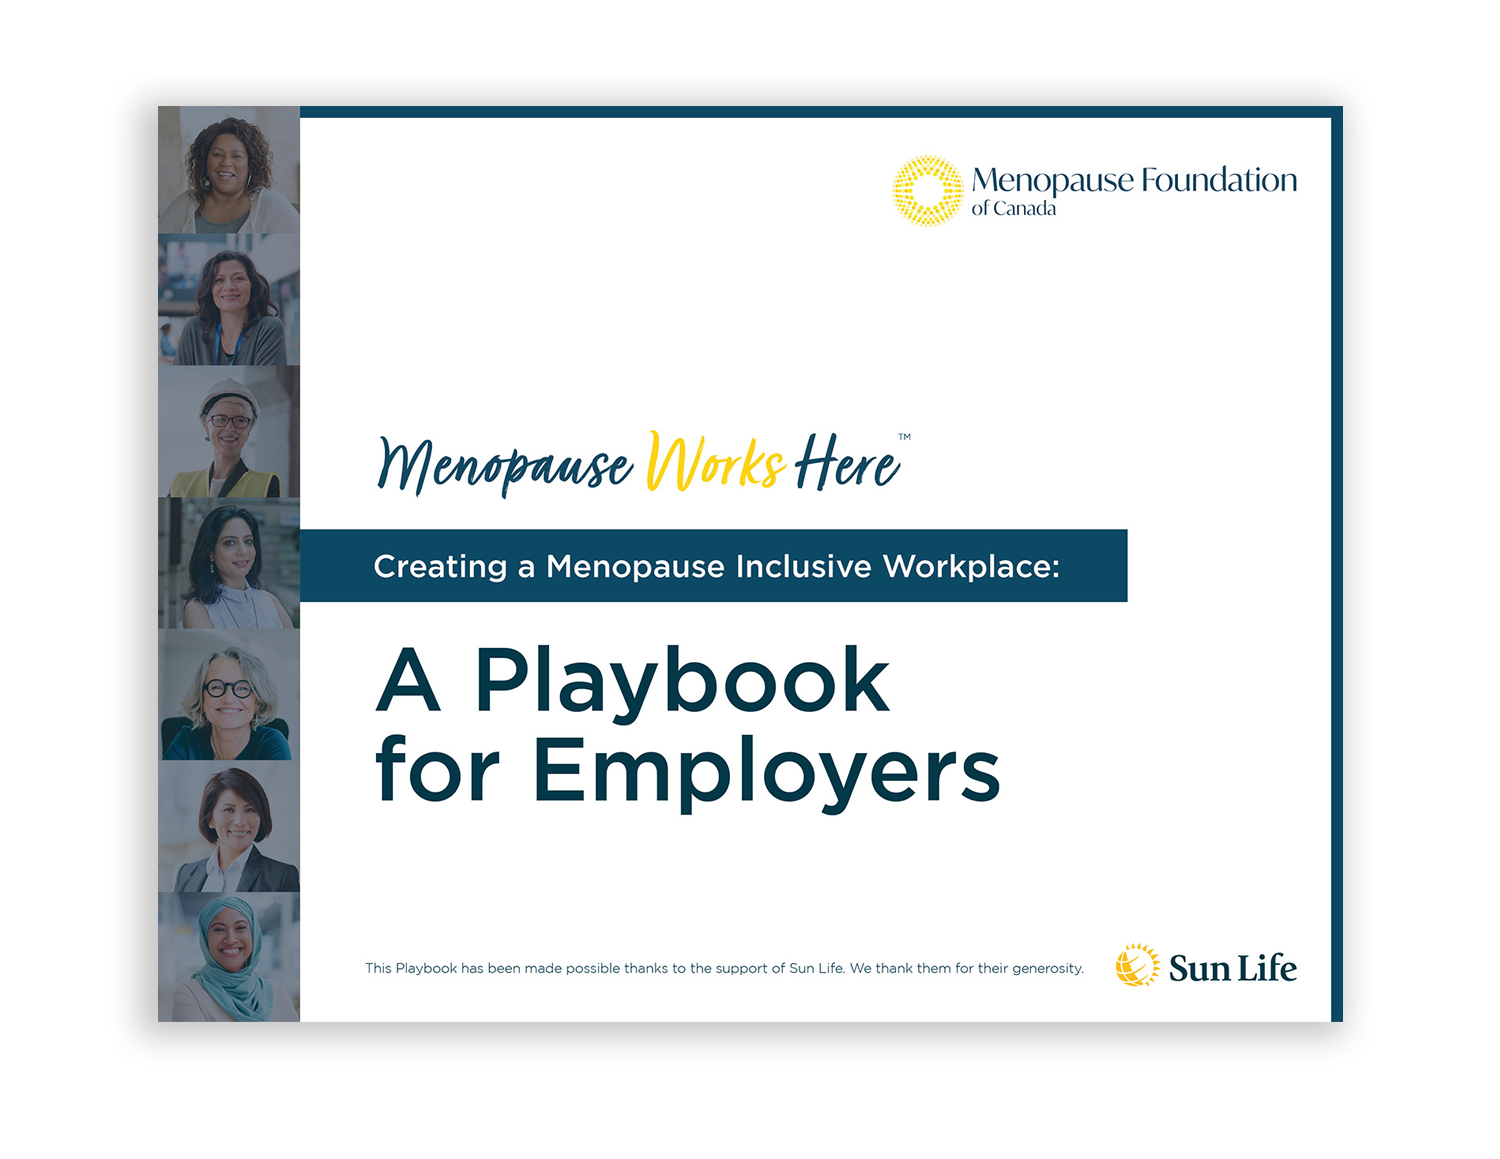 A Playbook for Employers